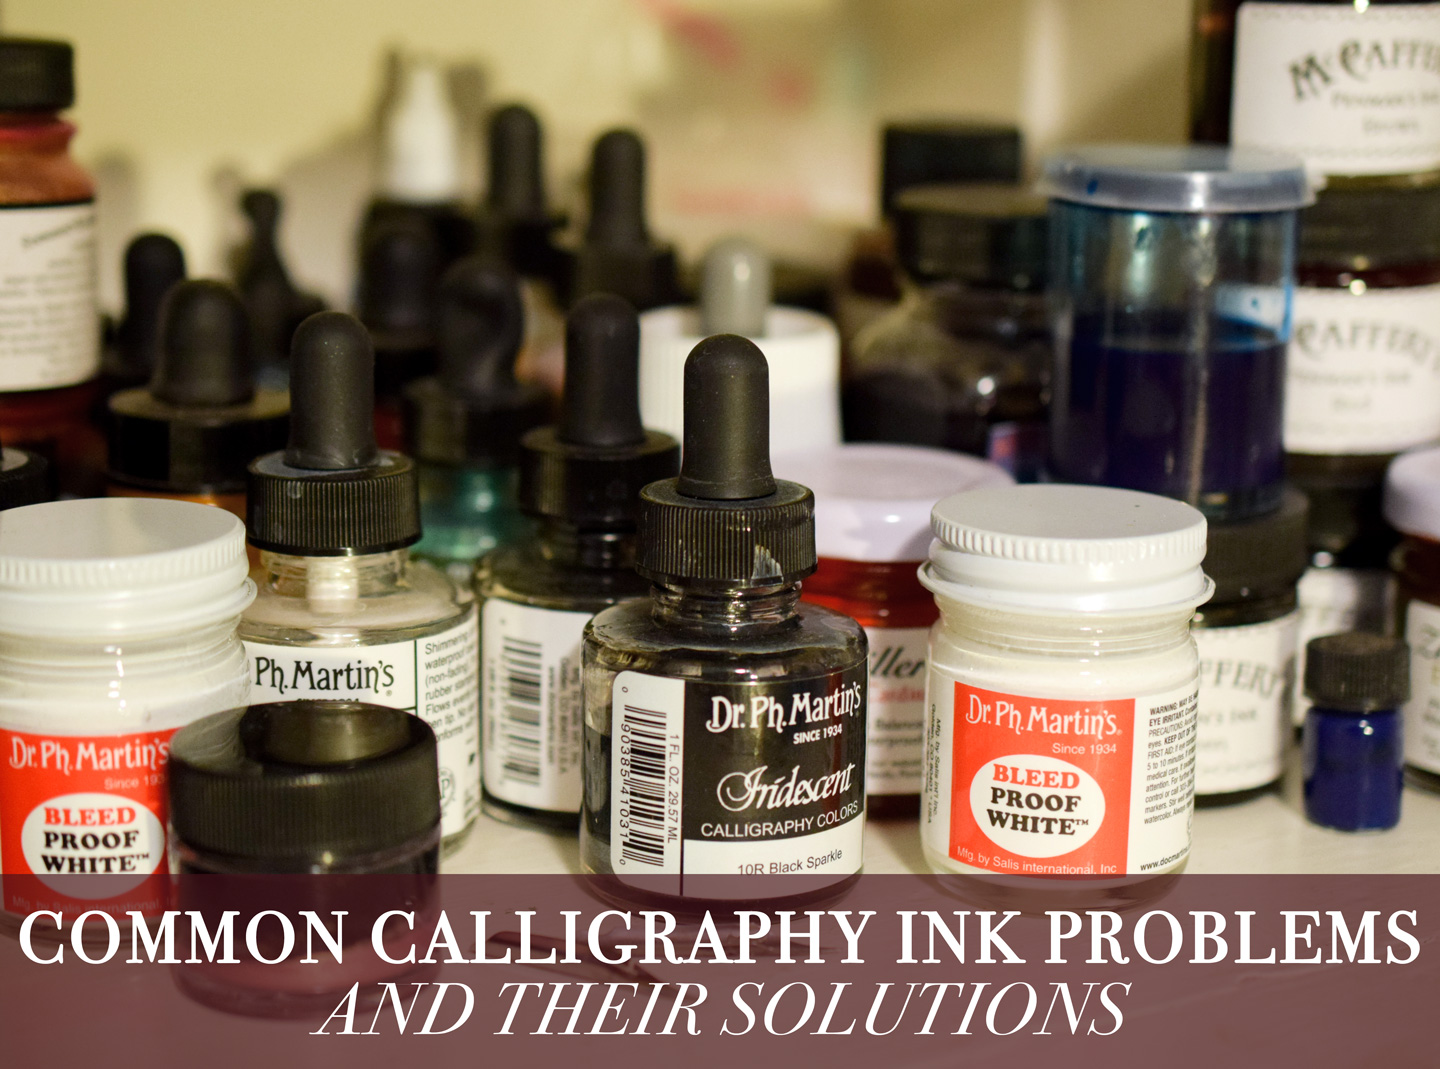 Common Calligraphy Ink Problems + Solutions